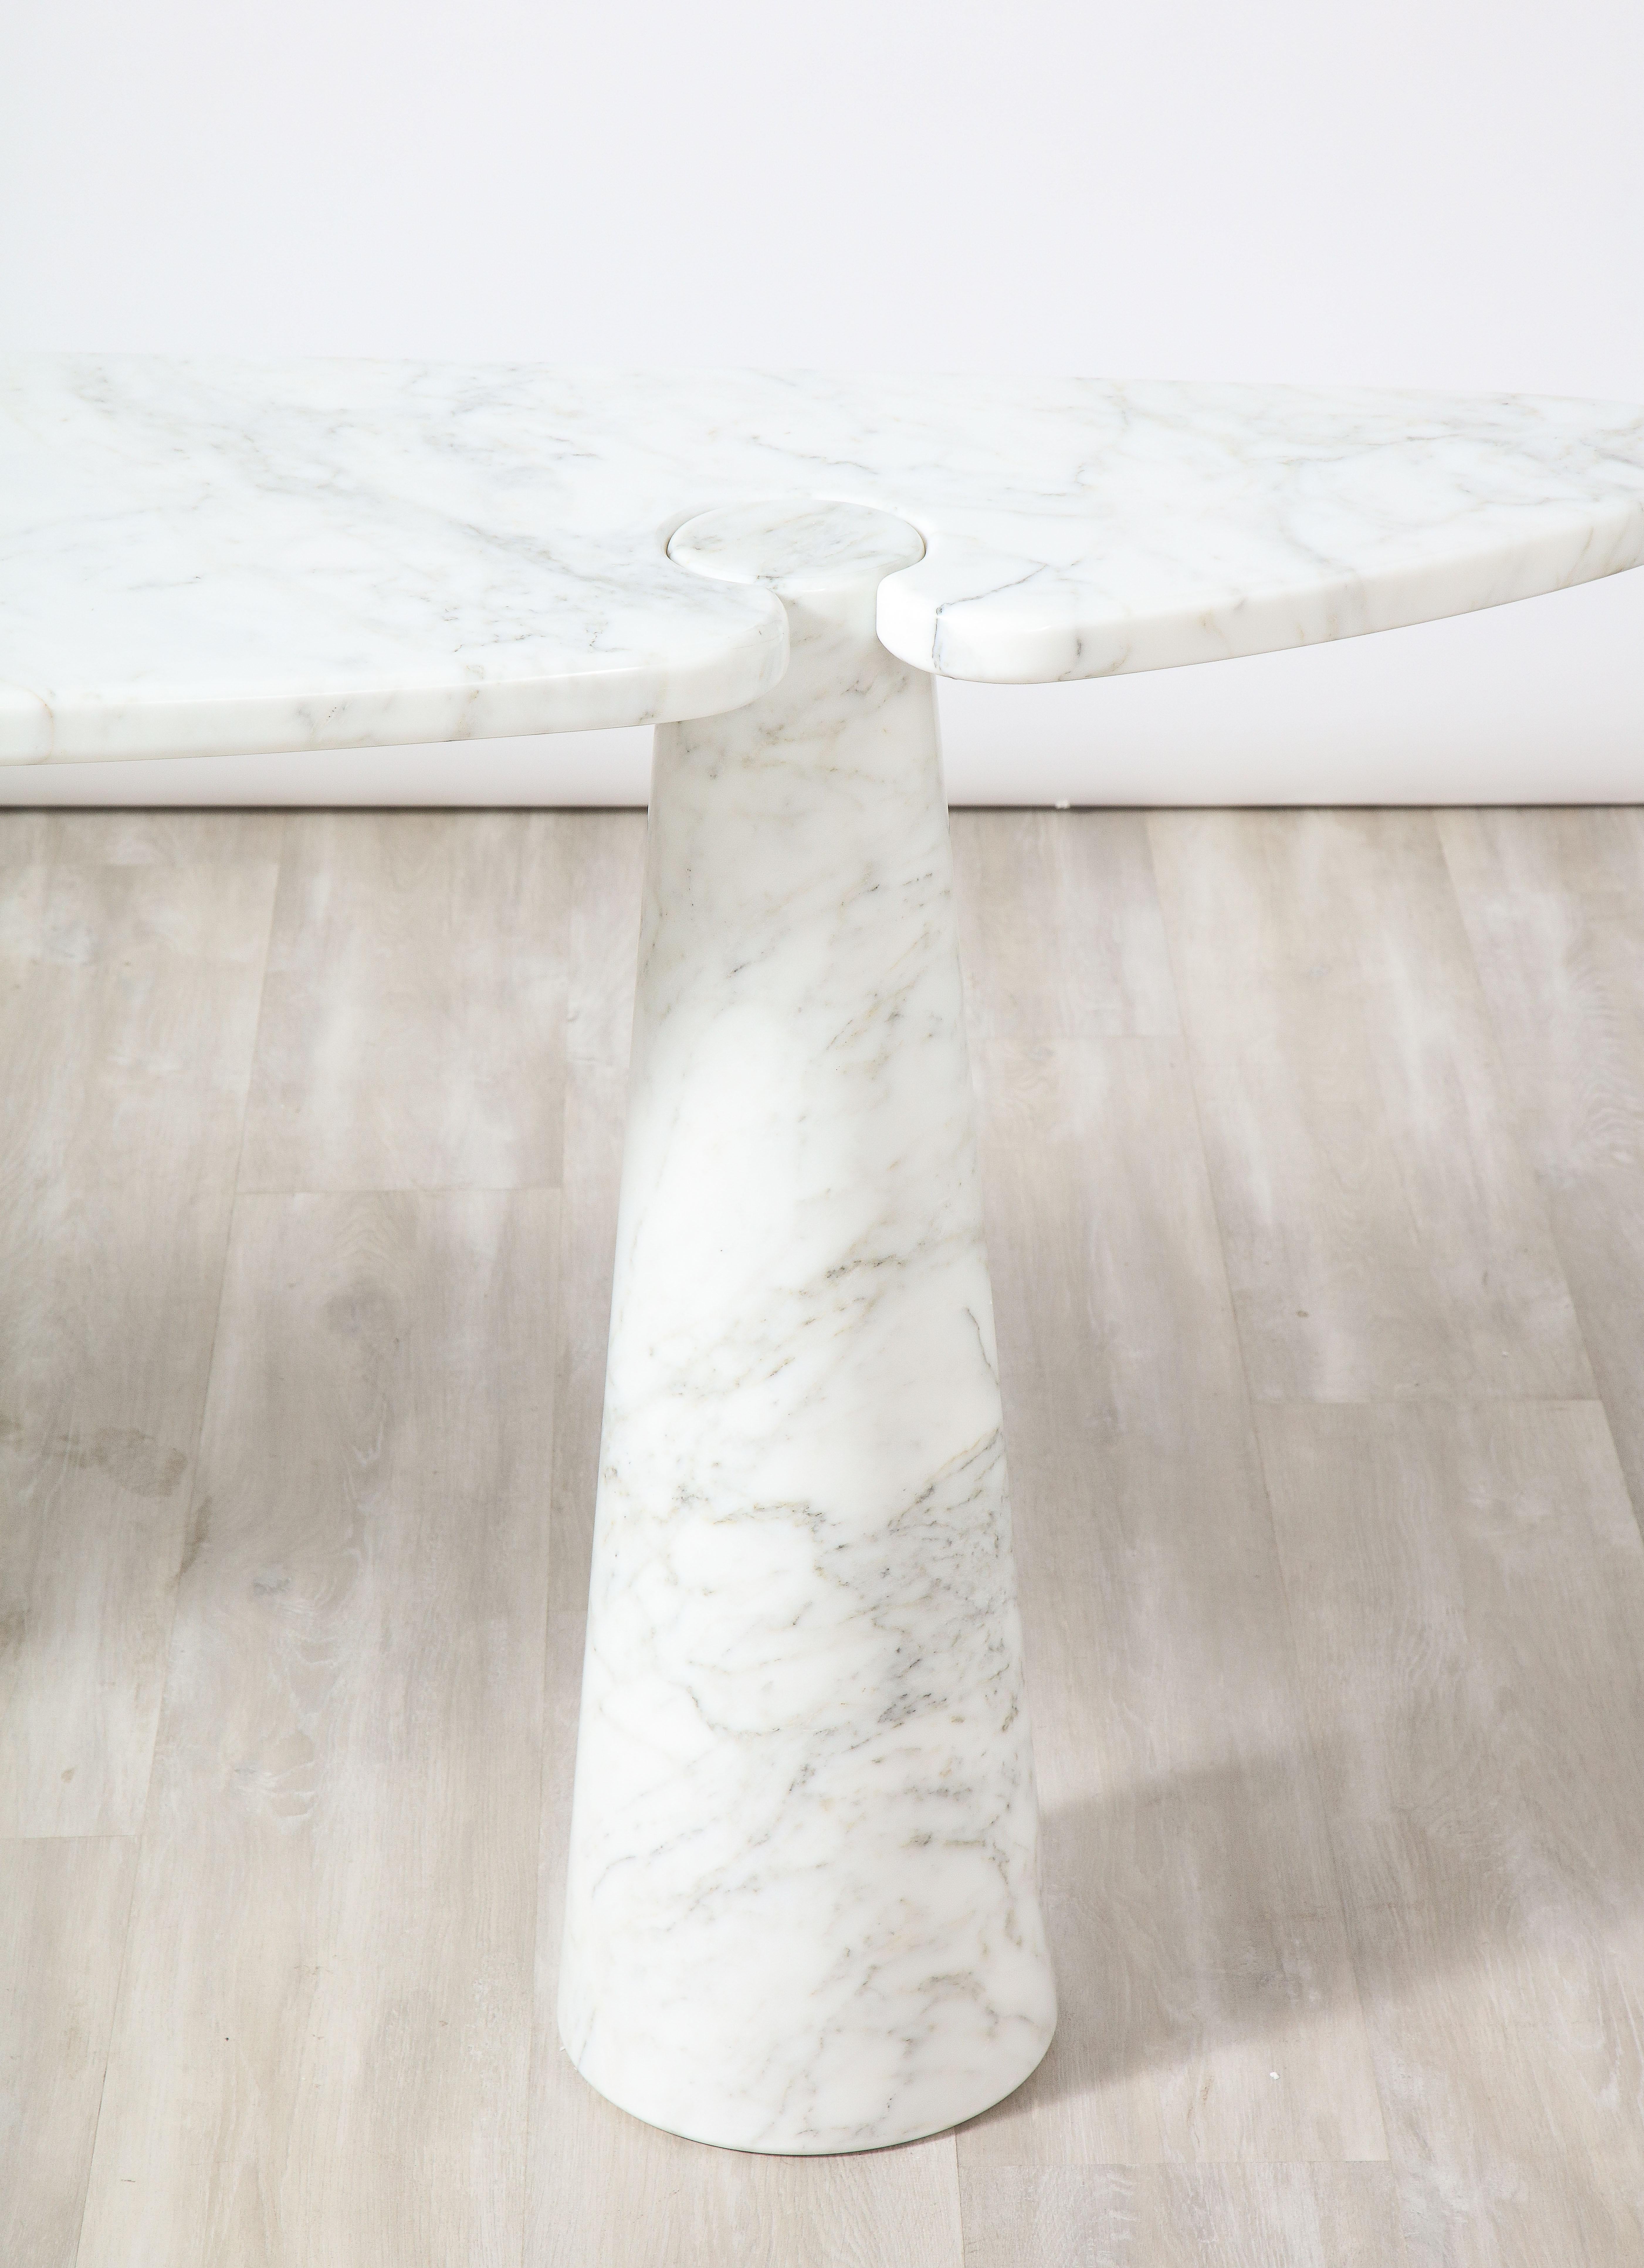 Designed by Angelo Mangiarotti for Skipper from the 'Eros' series, this iconic Carrara marble console table is supported on two conical leg bases, with beautiful subtle veining throughout the marble with organic soft curves throughout. This